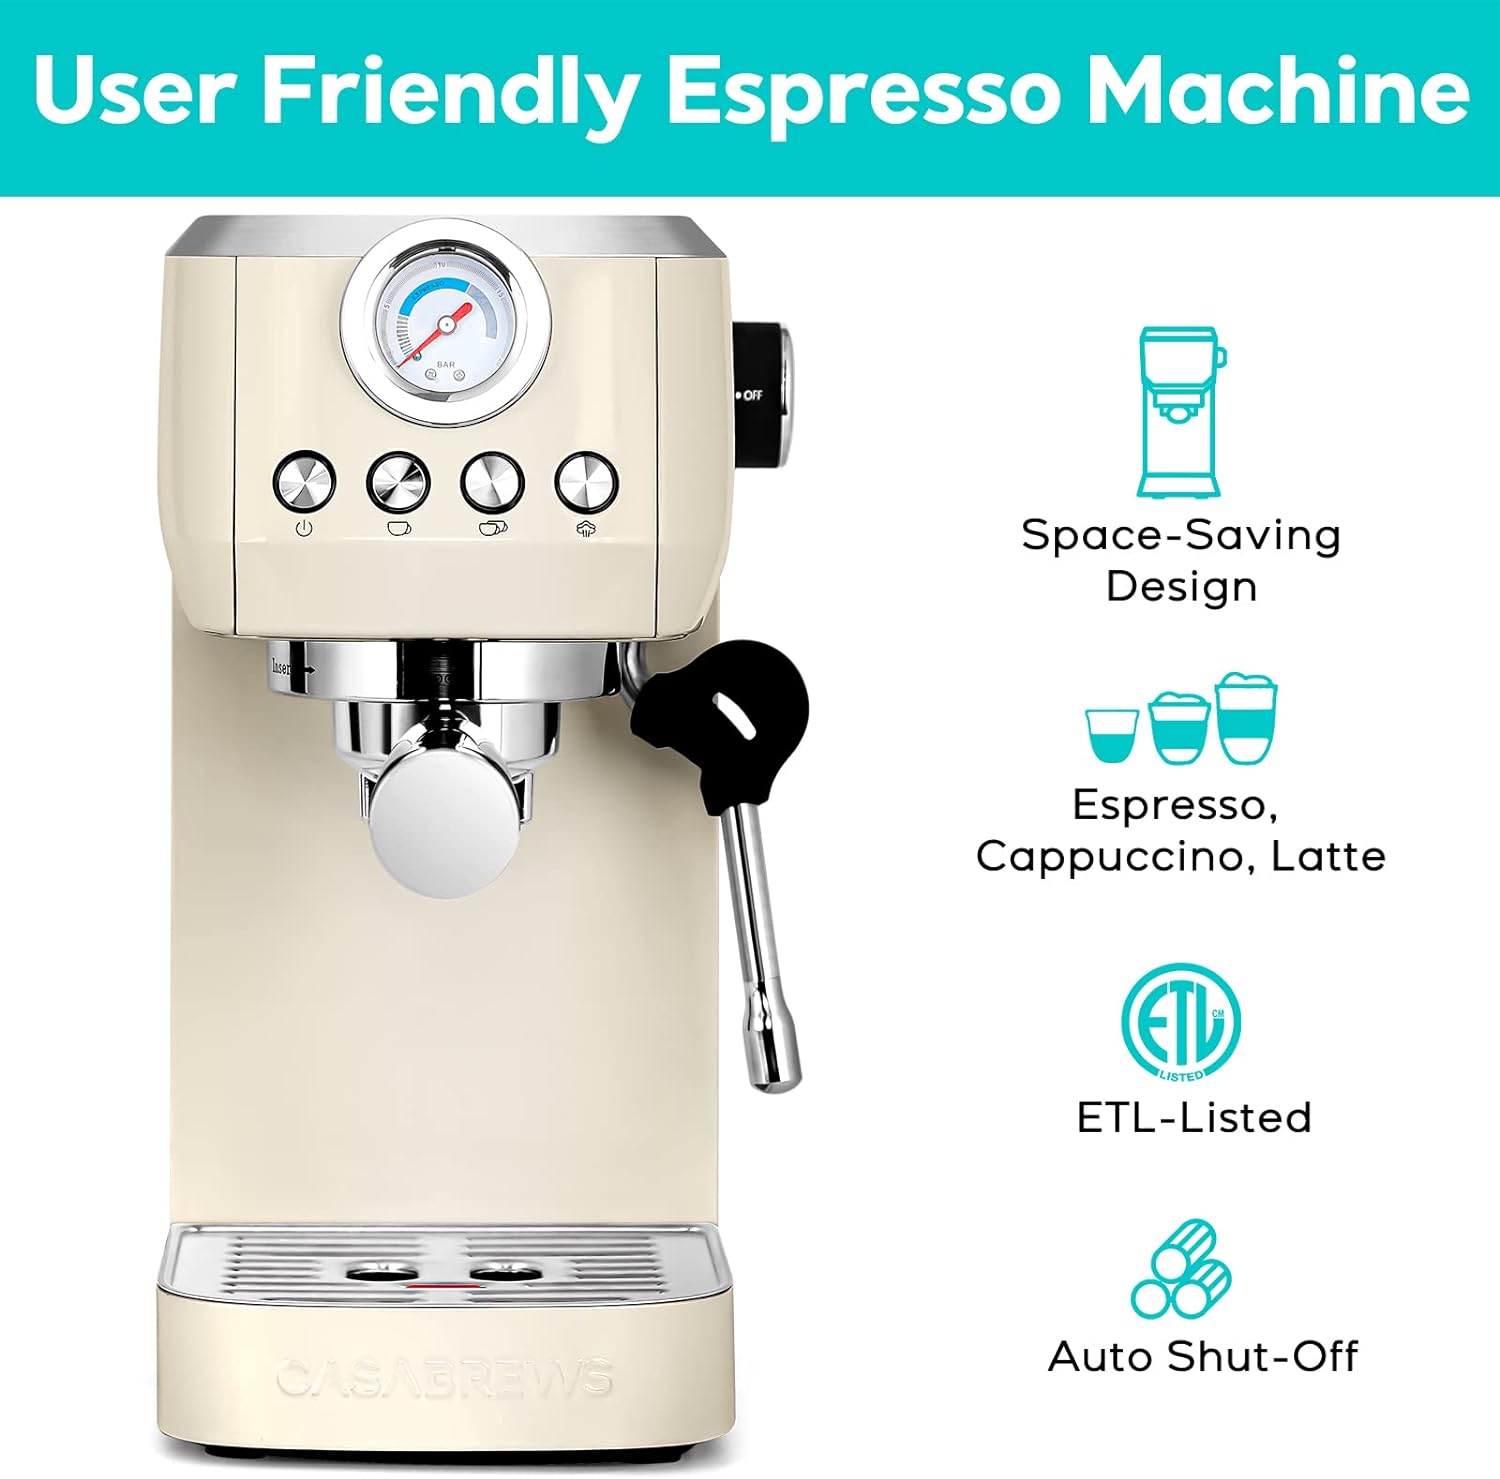 CASABREWS Espresso Machine 20 Bar, Compact Espresso Maker With Milk Frother Steam Wand, Stainless Steel Cappuccino Machine and Latte Machine With 43.9 oz Removable Water Tank for Home Barista, Creamy